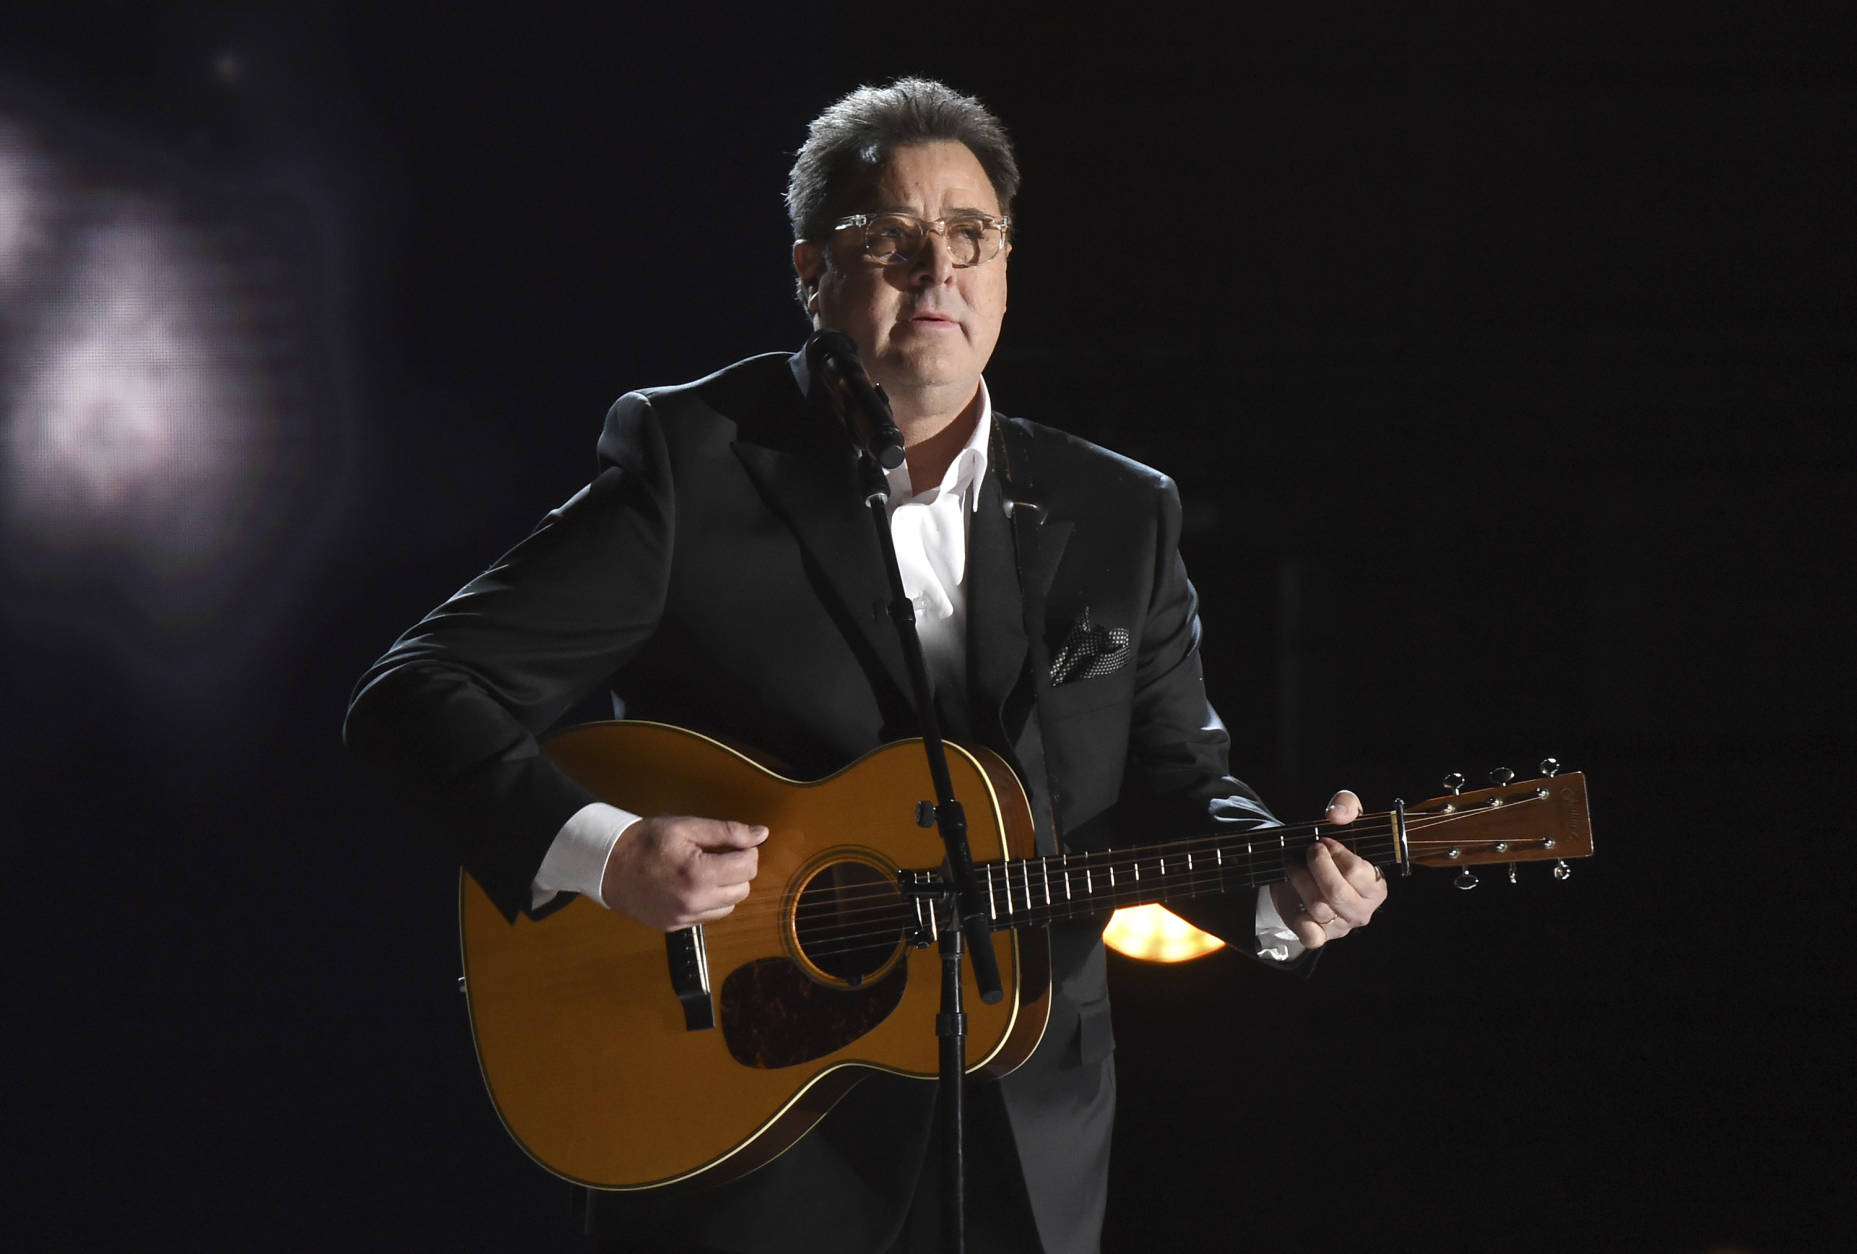 Vince Gill performs "Mama Tried" at the 50th annual CMA Awards at the Bridgestone Arena on Wednesday, Nov. 2, 2016, in Nashville, Tenn. (Photo by Charles Sykes/Invision/AP)